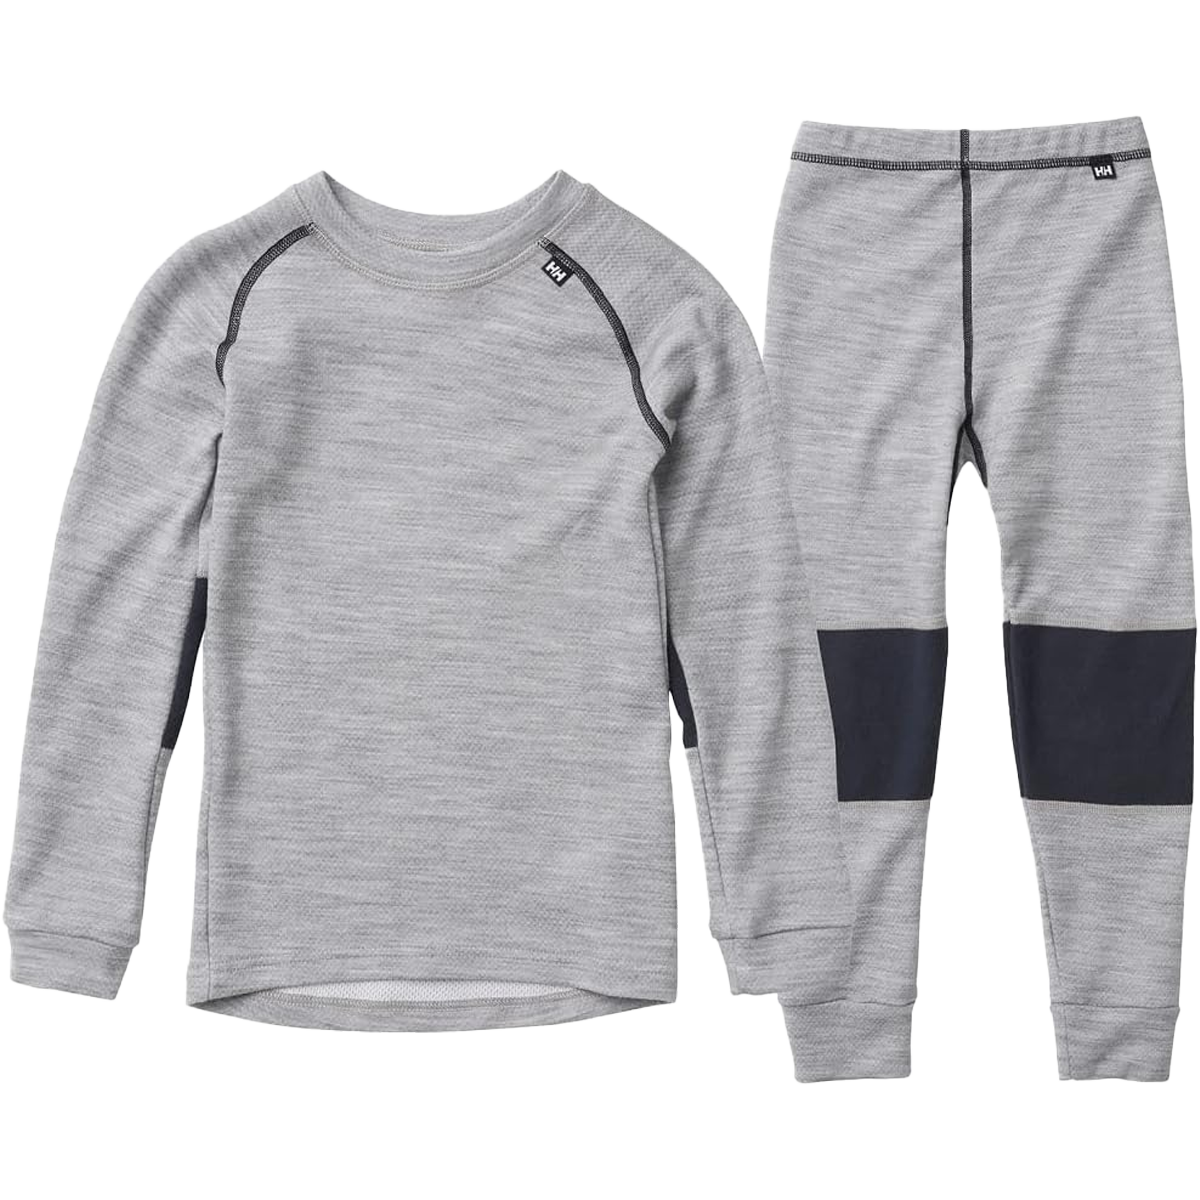 Youth HH Merino Mid Pant alternate view